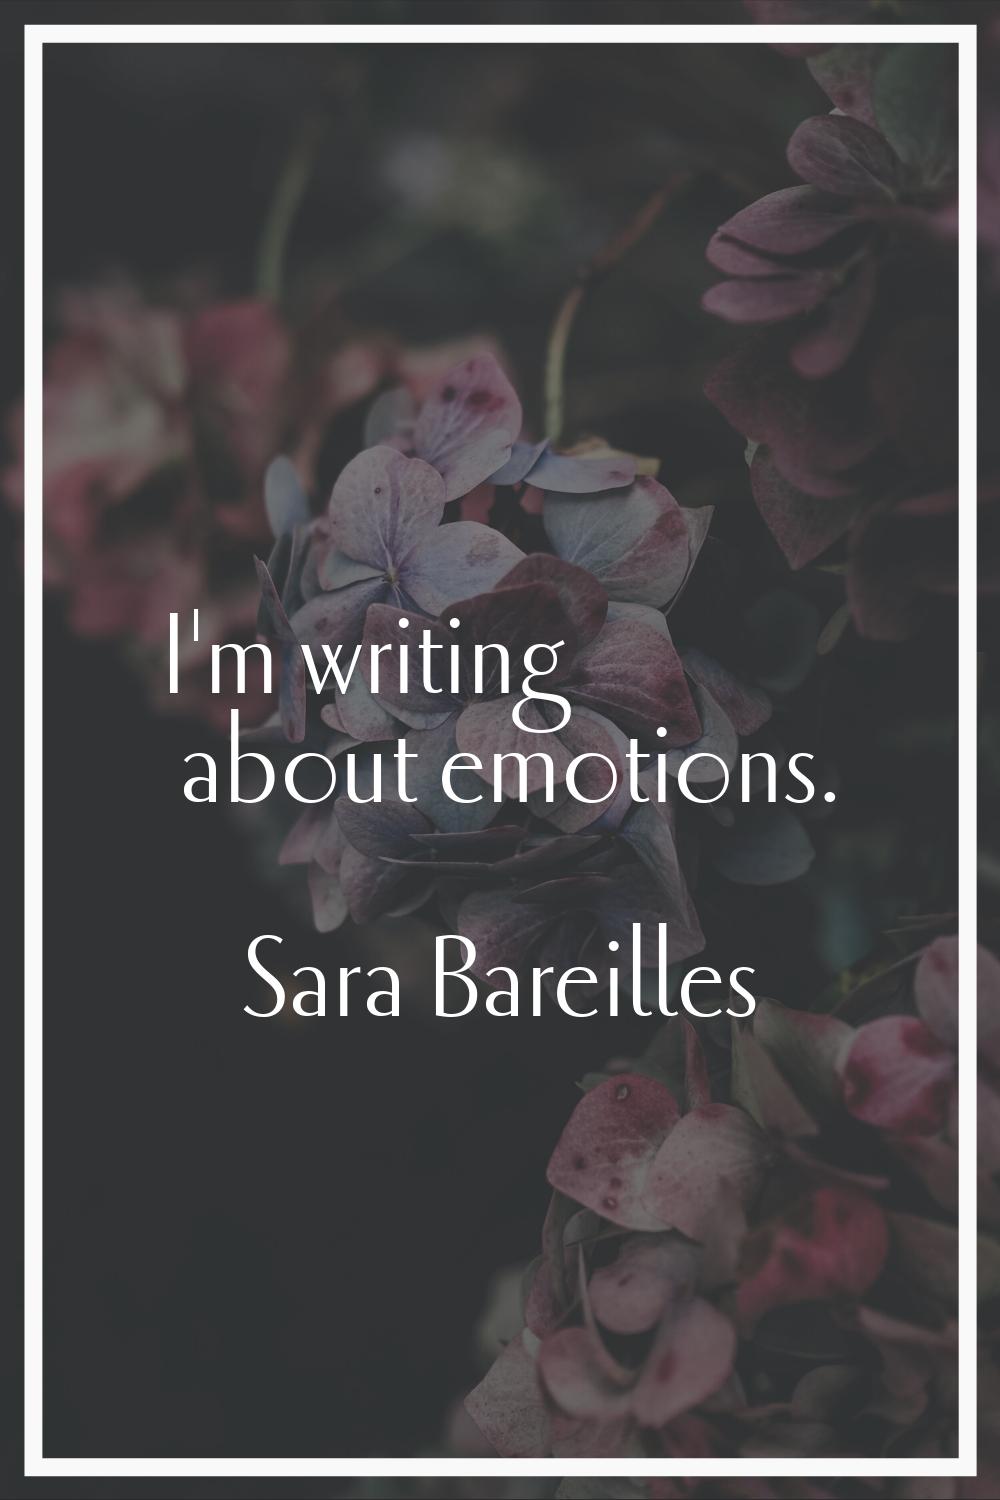 I'm writing about emotions.